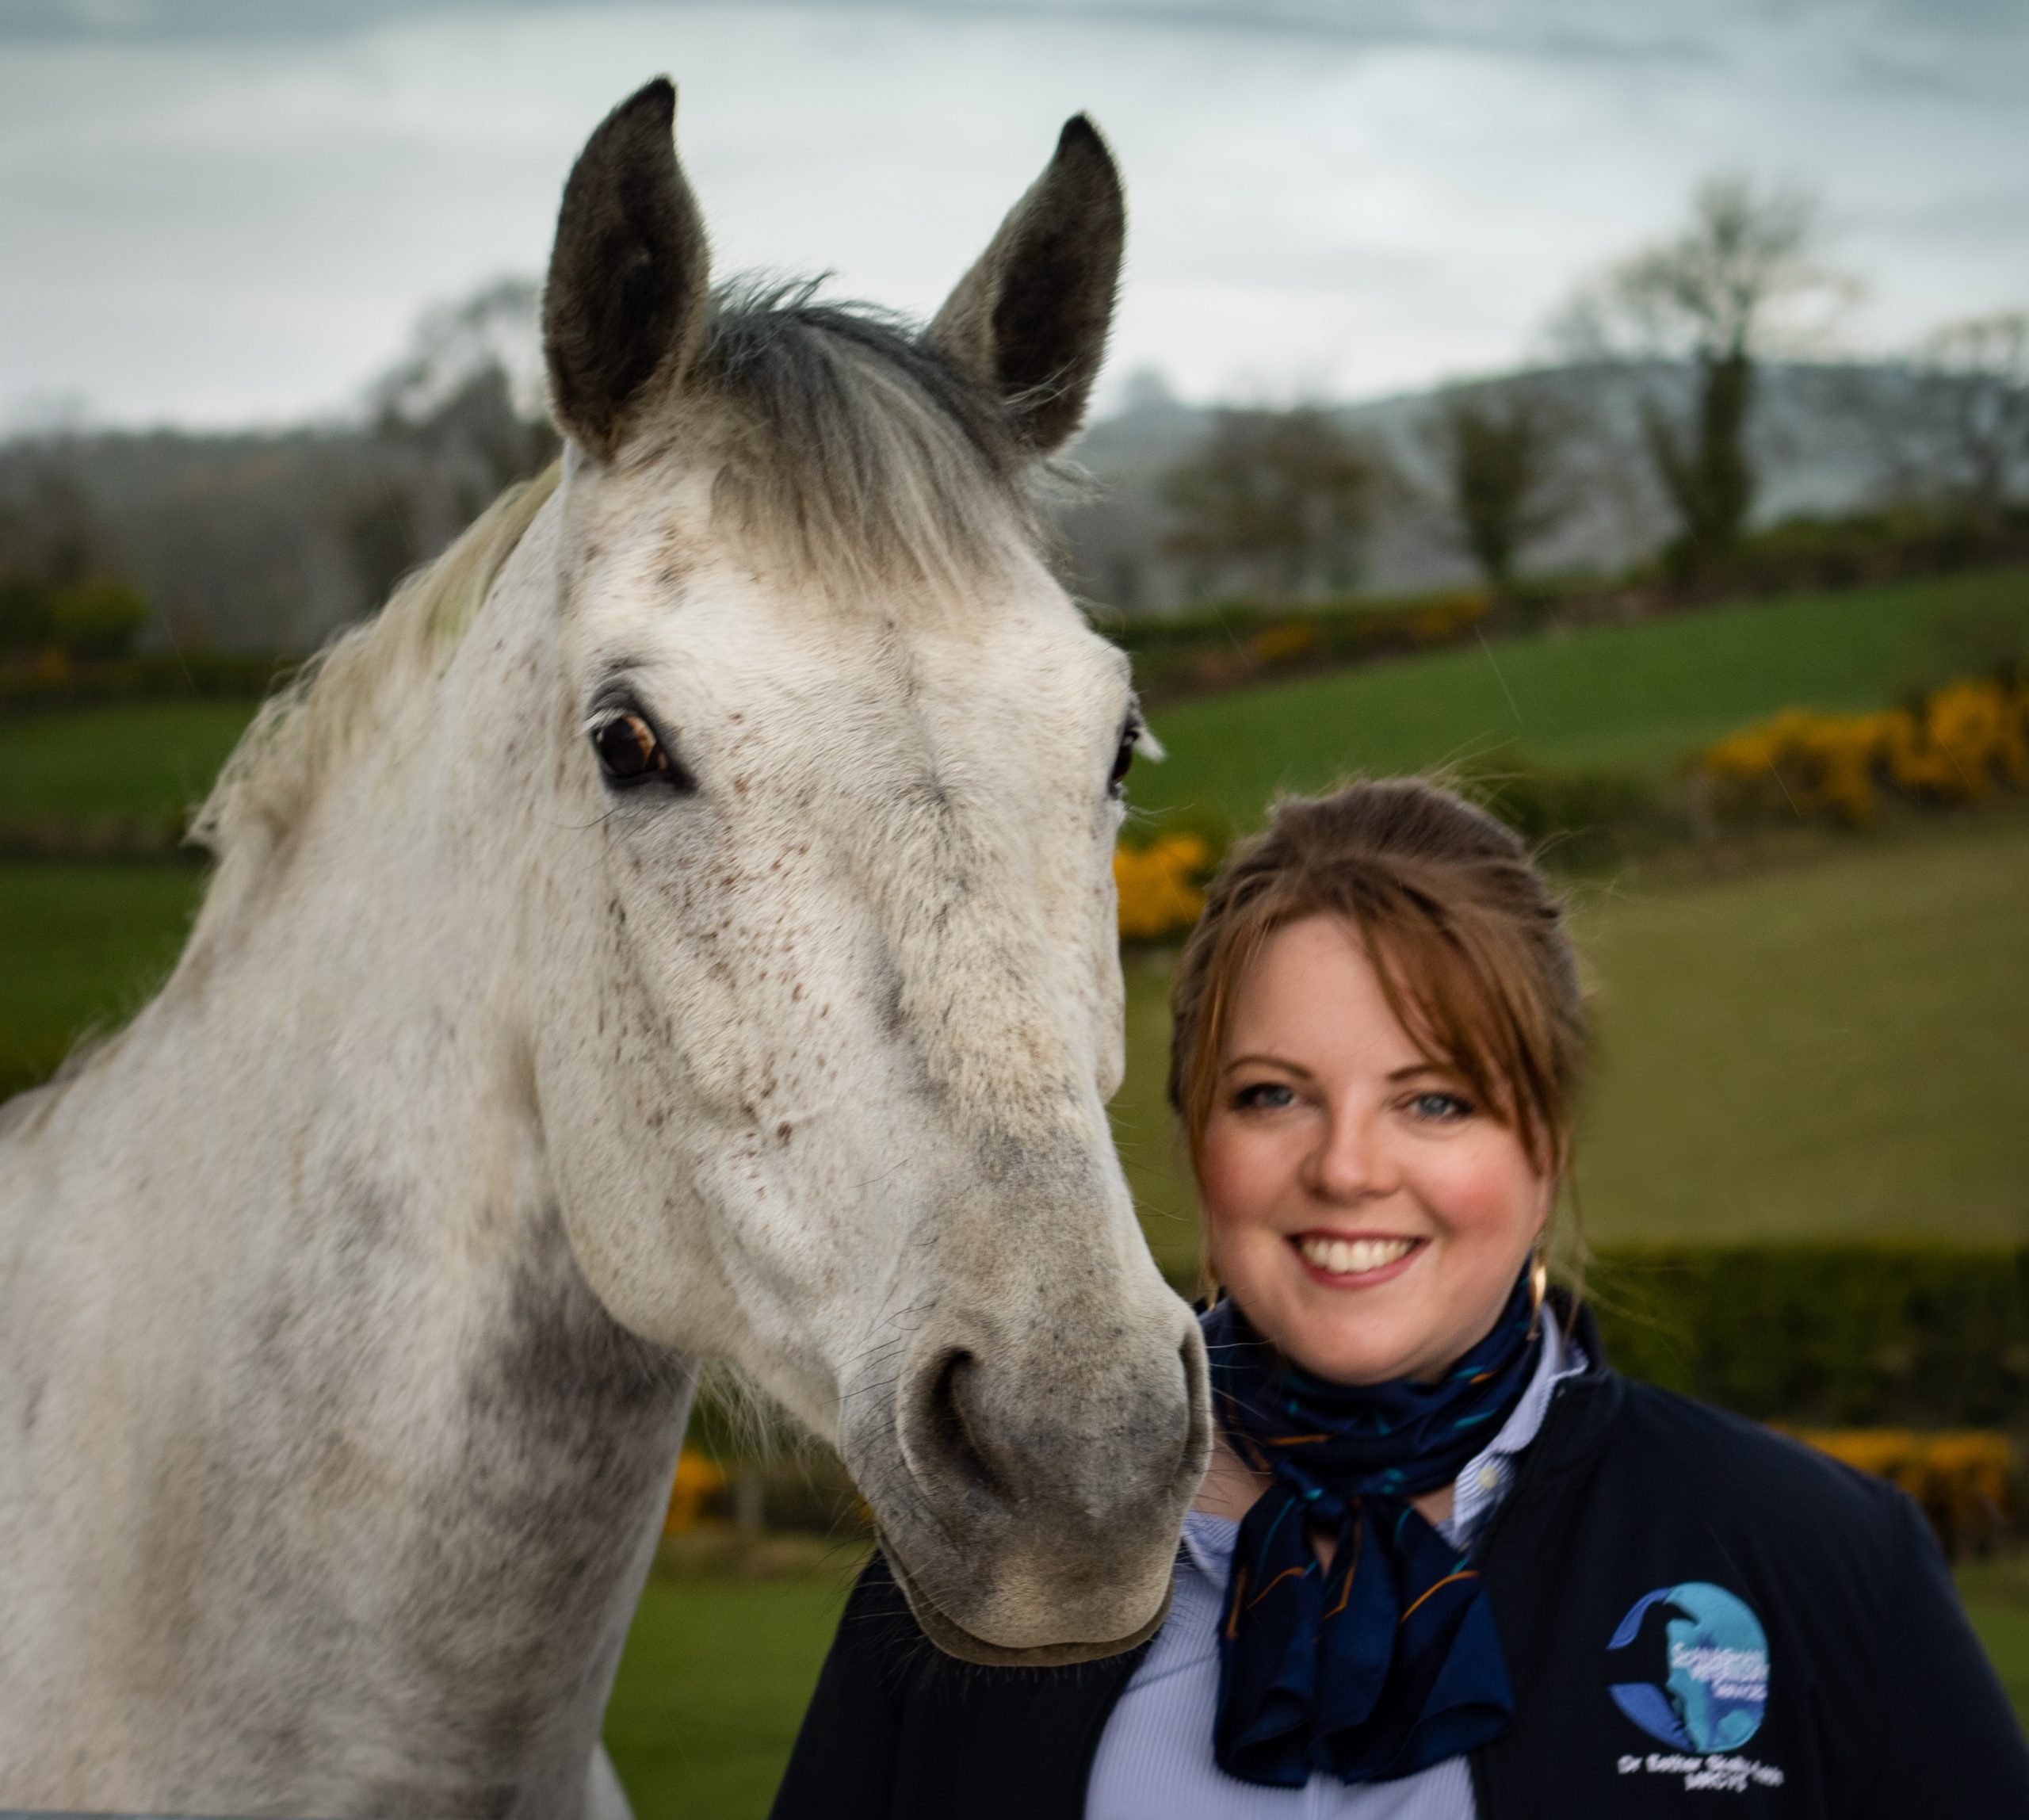 Equine rehab qualification an Irish first for Esther